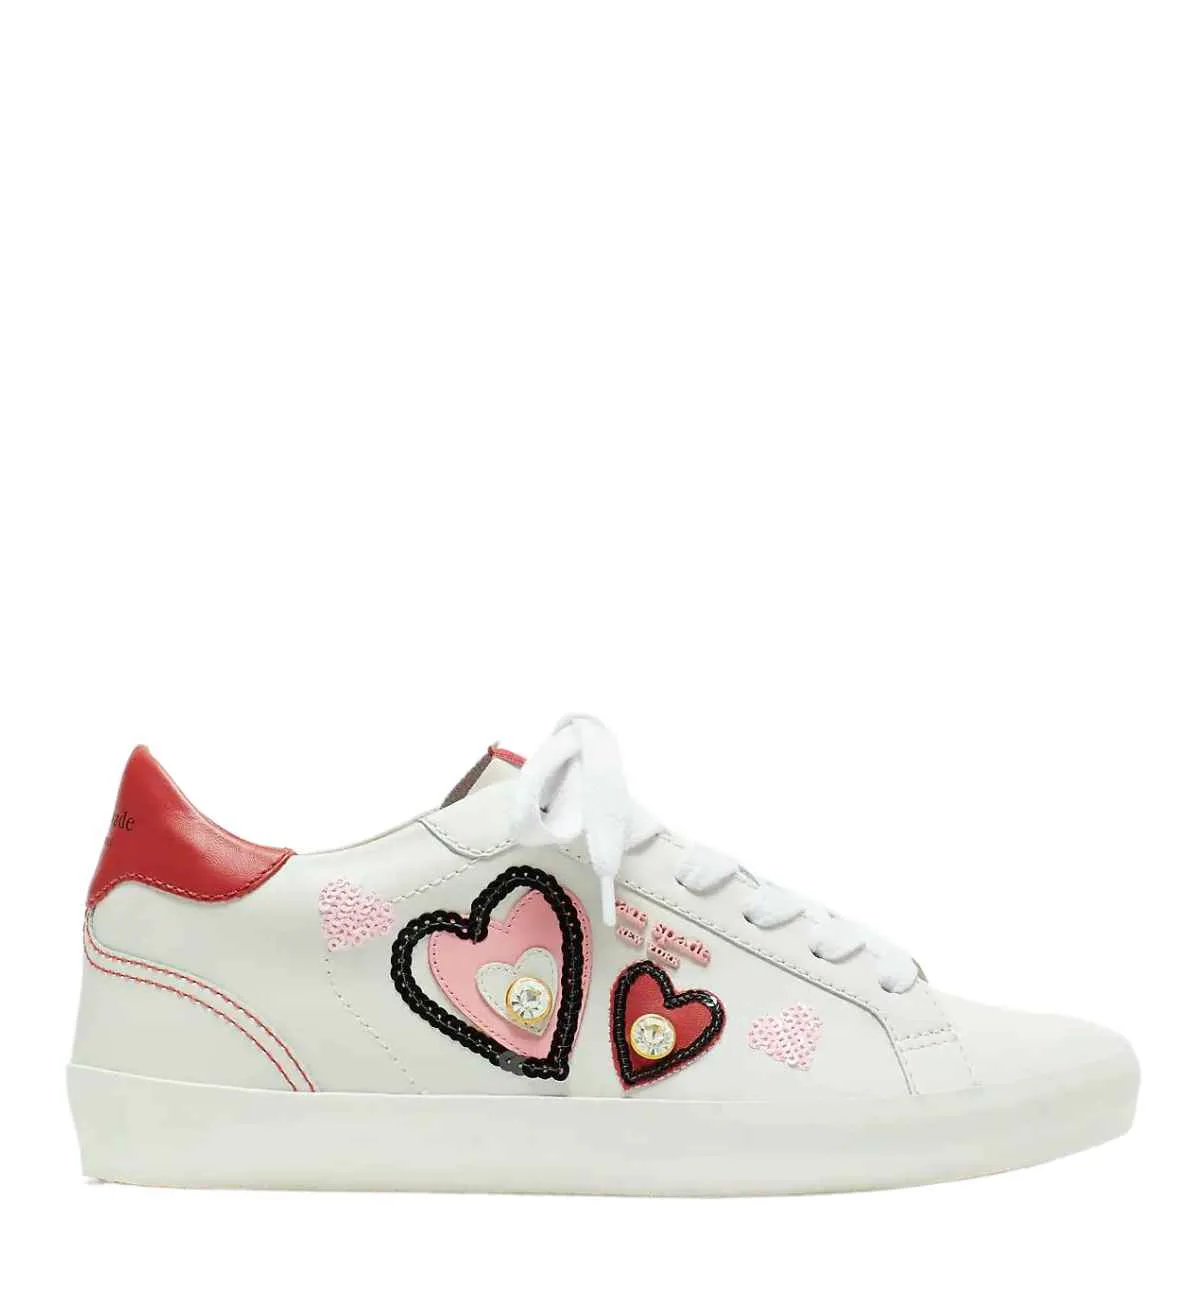 White heart sneaker with various textured heart on the side with white laces on white background.